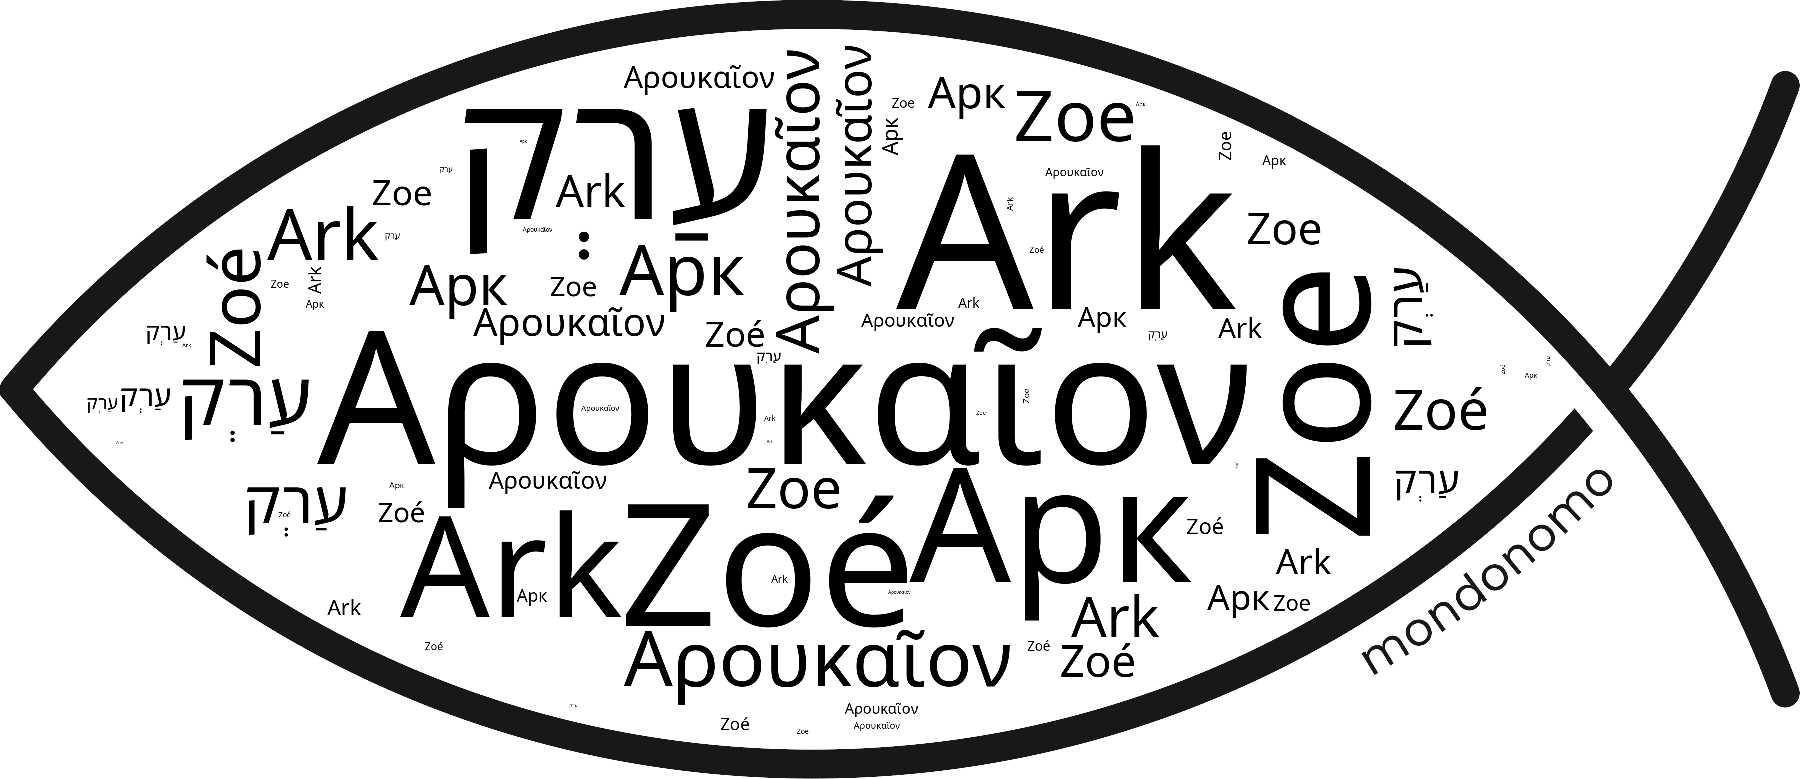 Name Ark in the world's Bibles